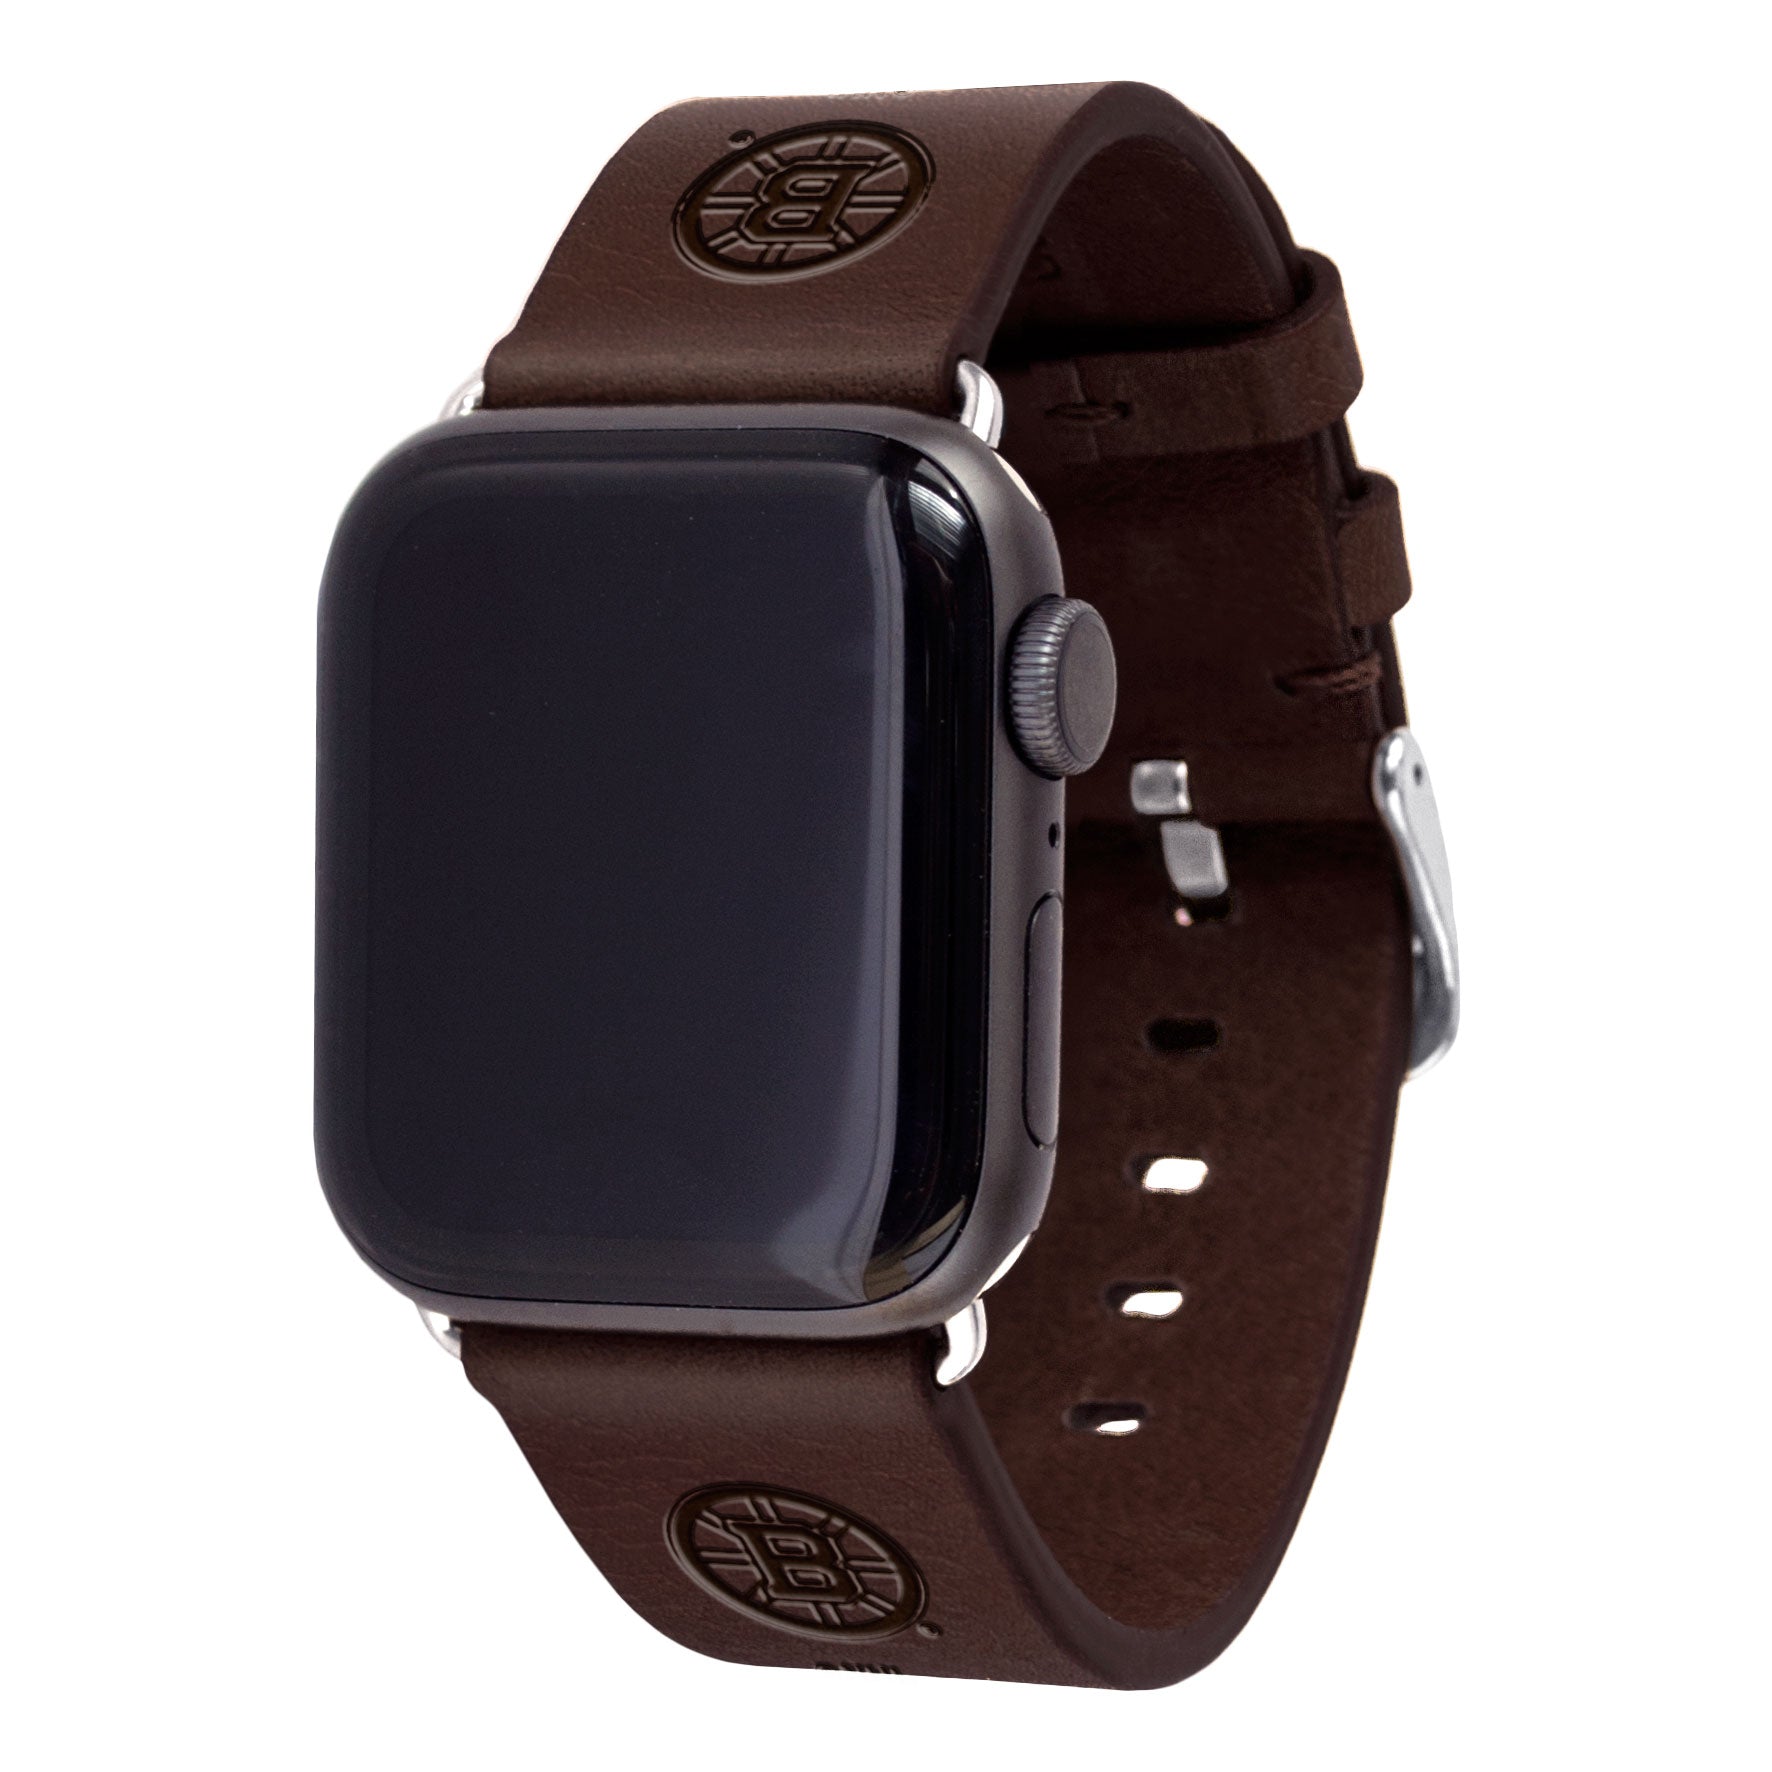 Boston Bruins Leather Apple Watch Band - AffinityBands